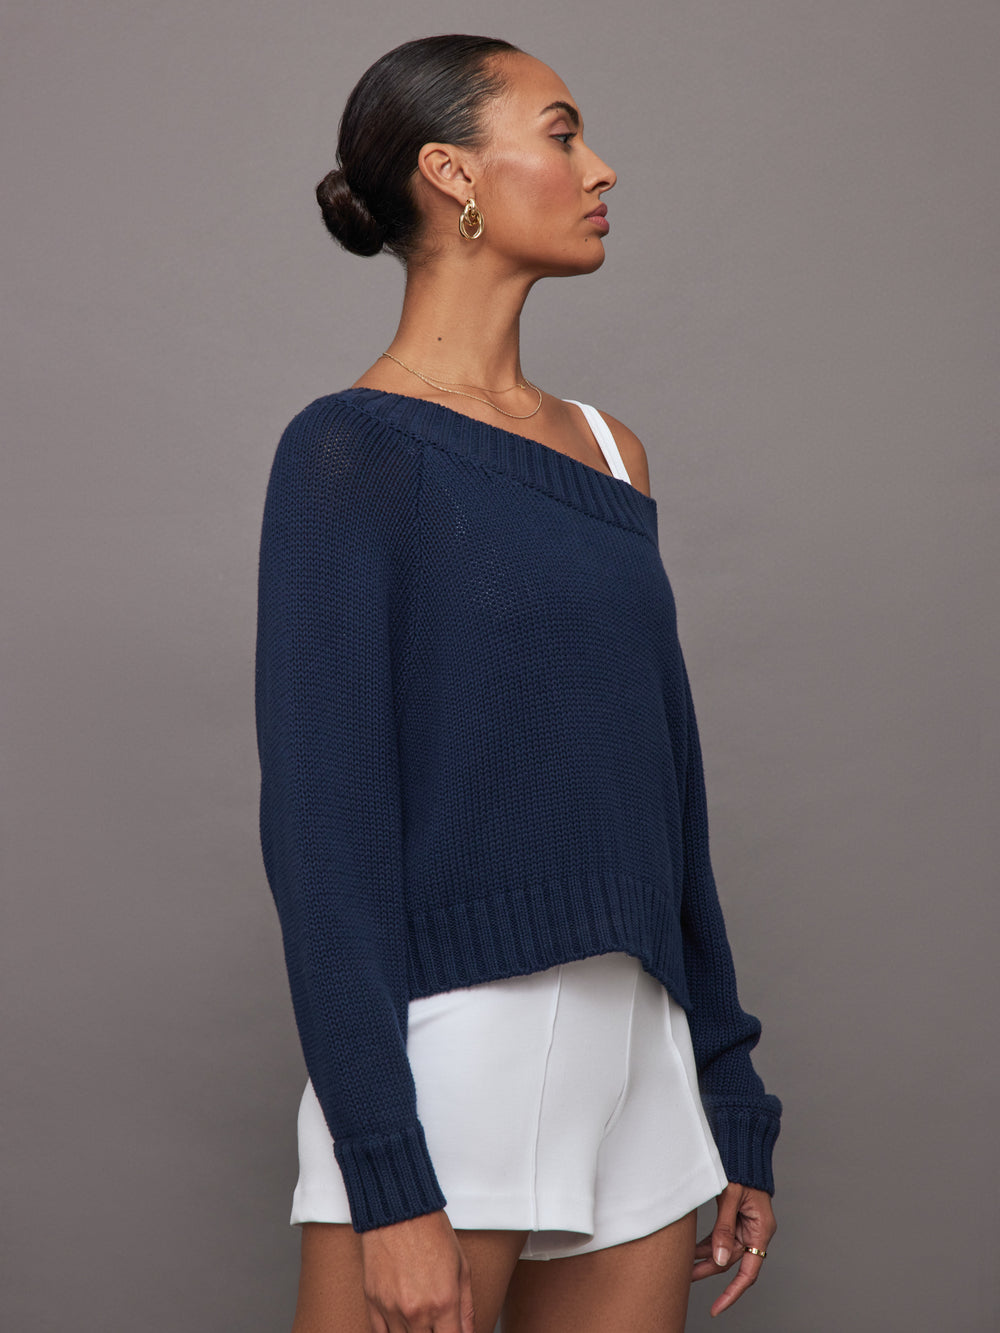 Slouchy Knit Sweater - Navy